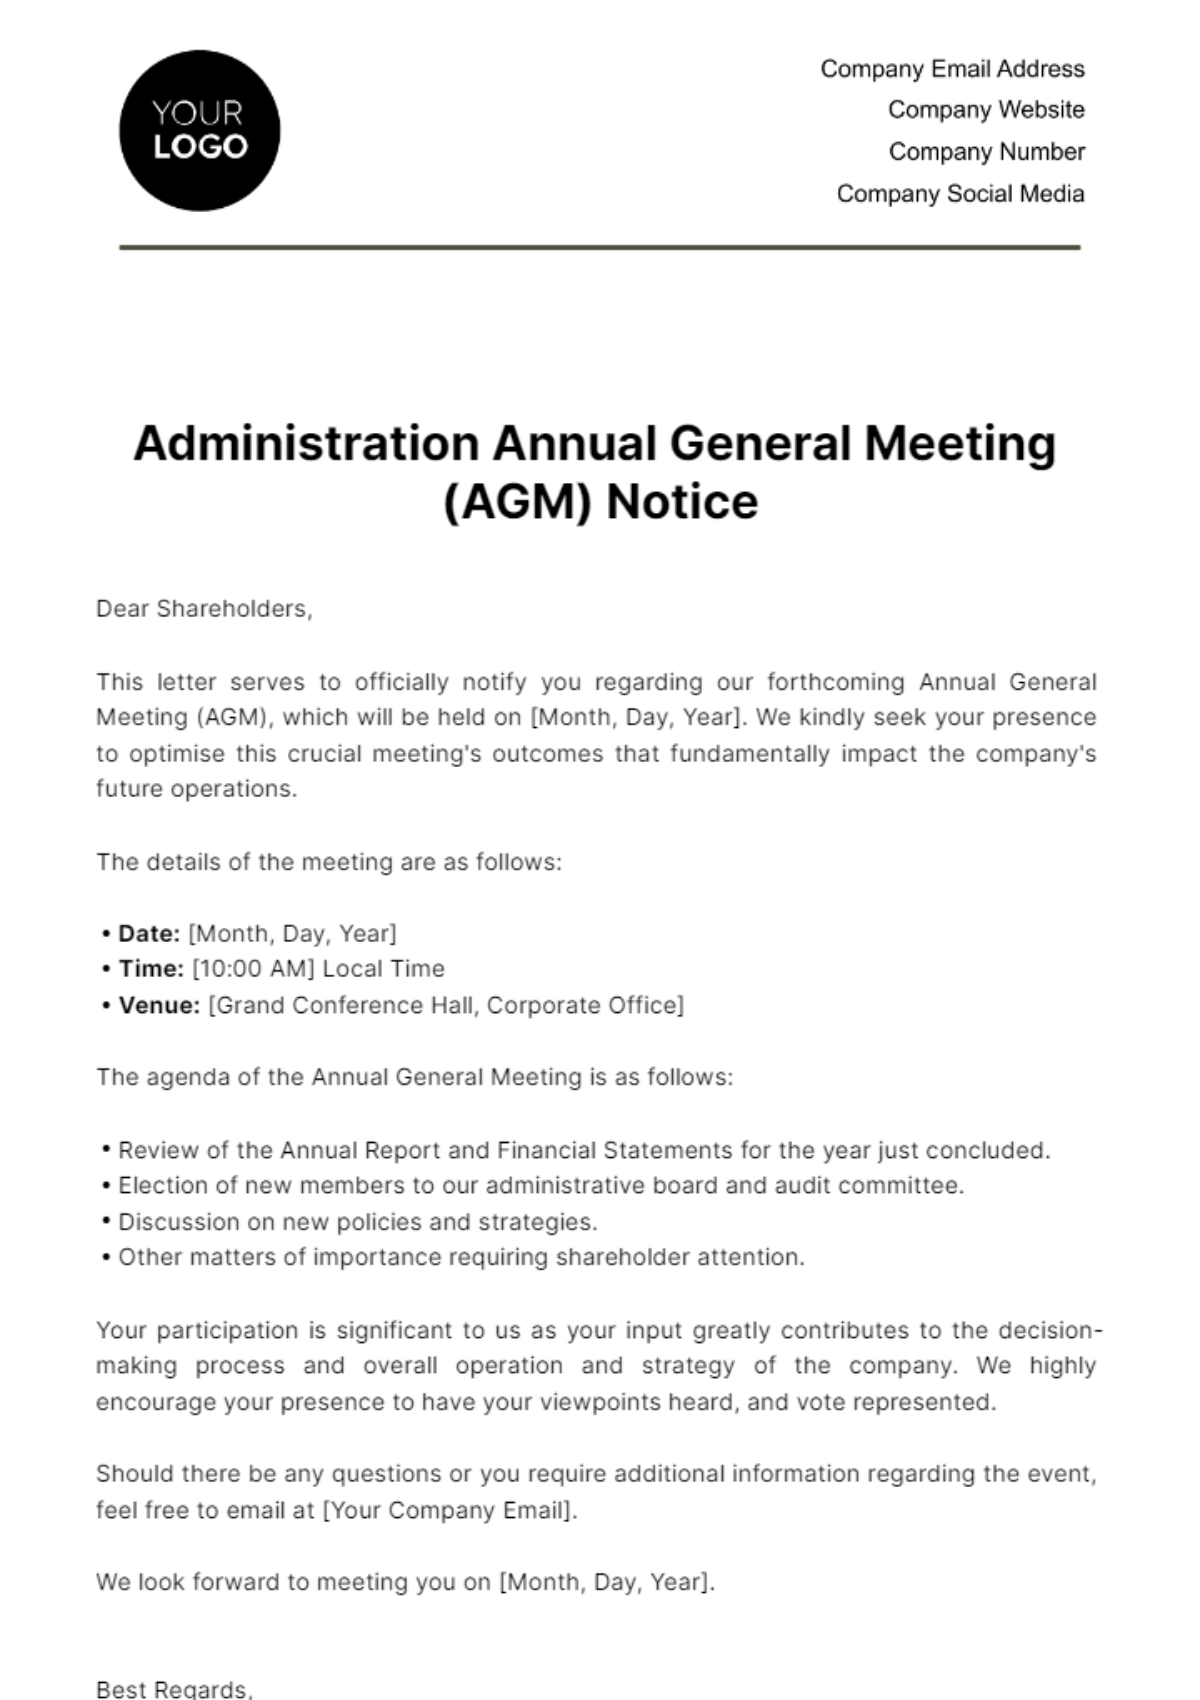 Administration Annual General Meeting (AGM) Notice Template